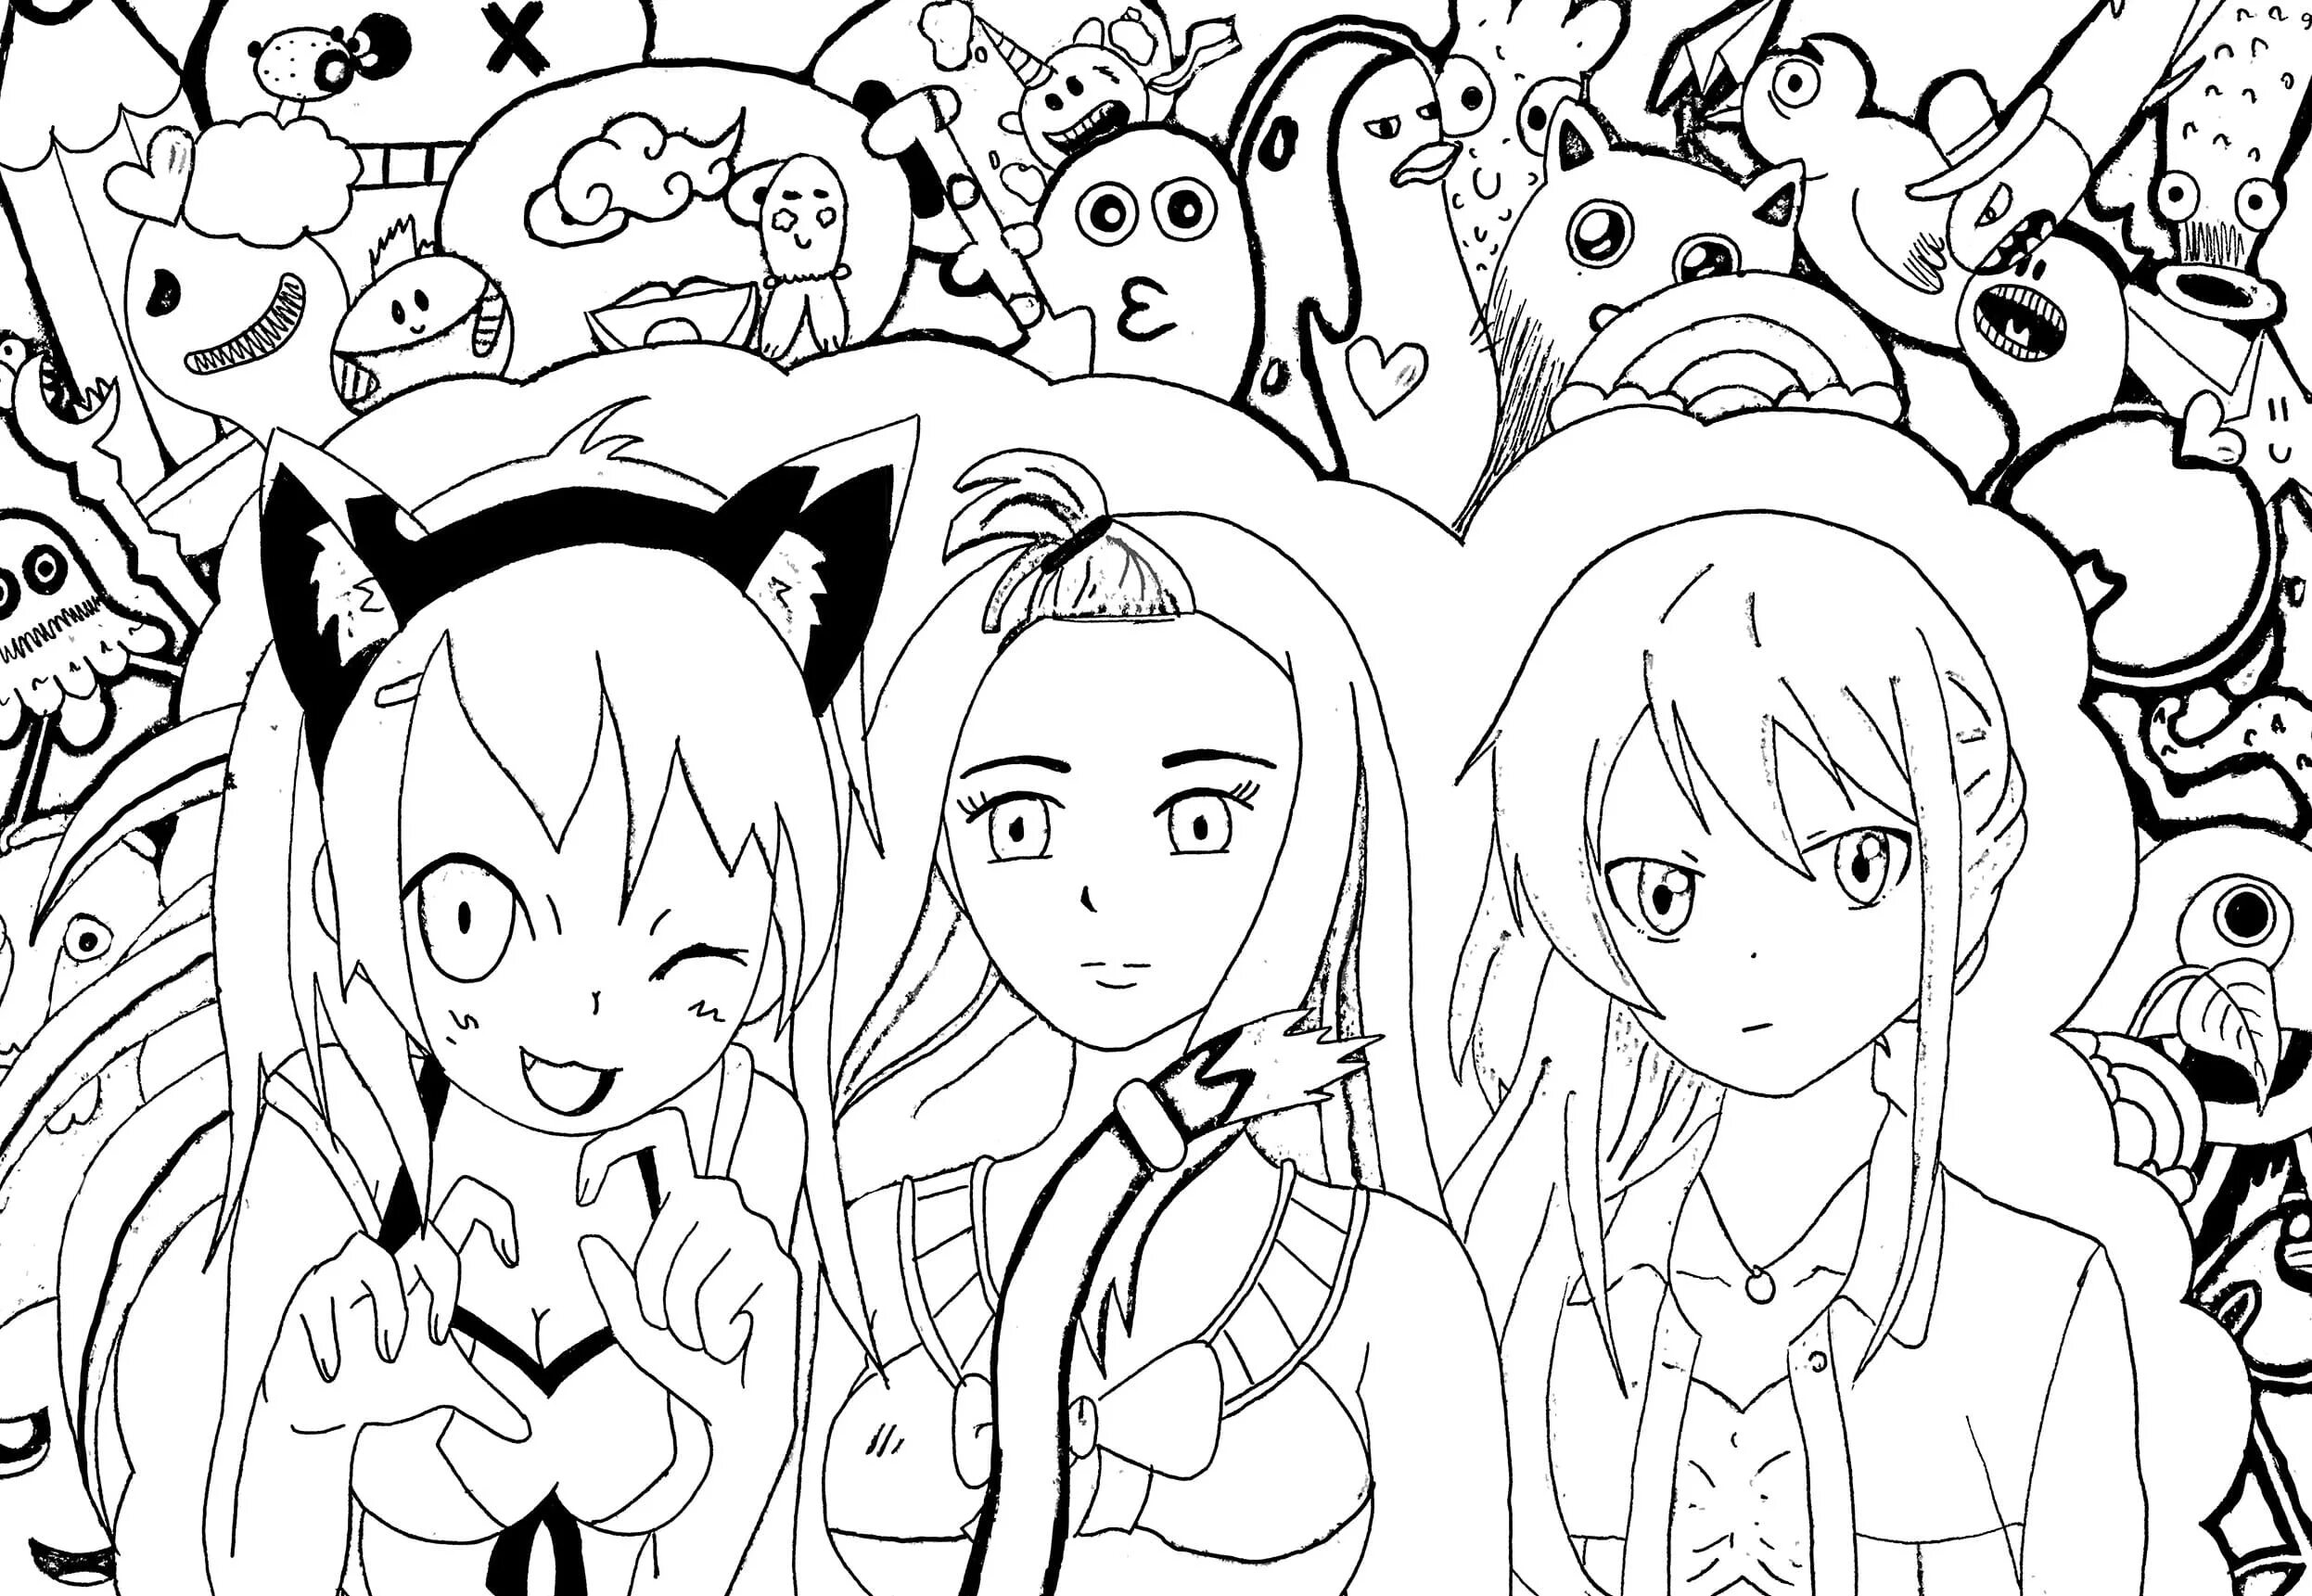 Stylish anime poster coloring page